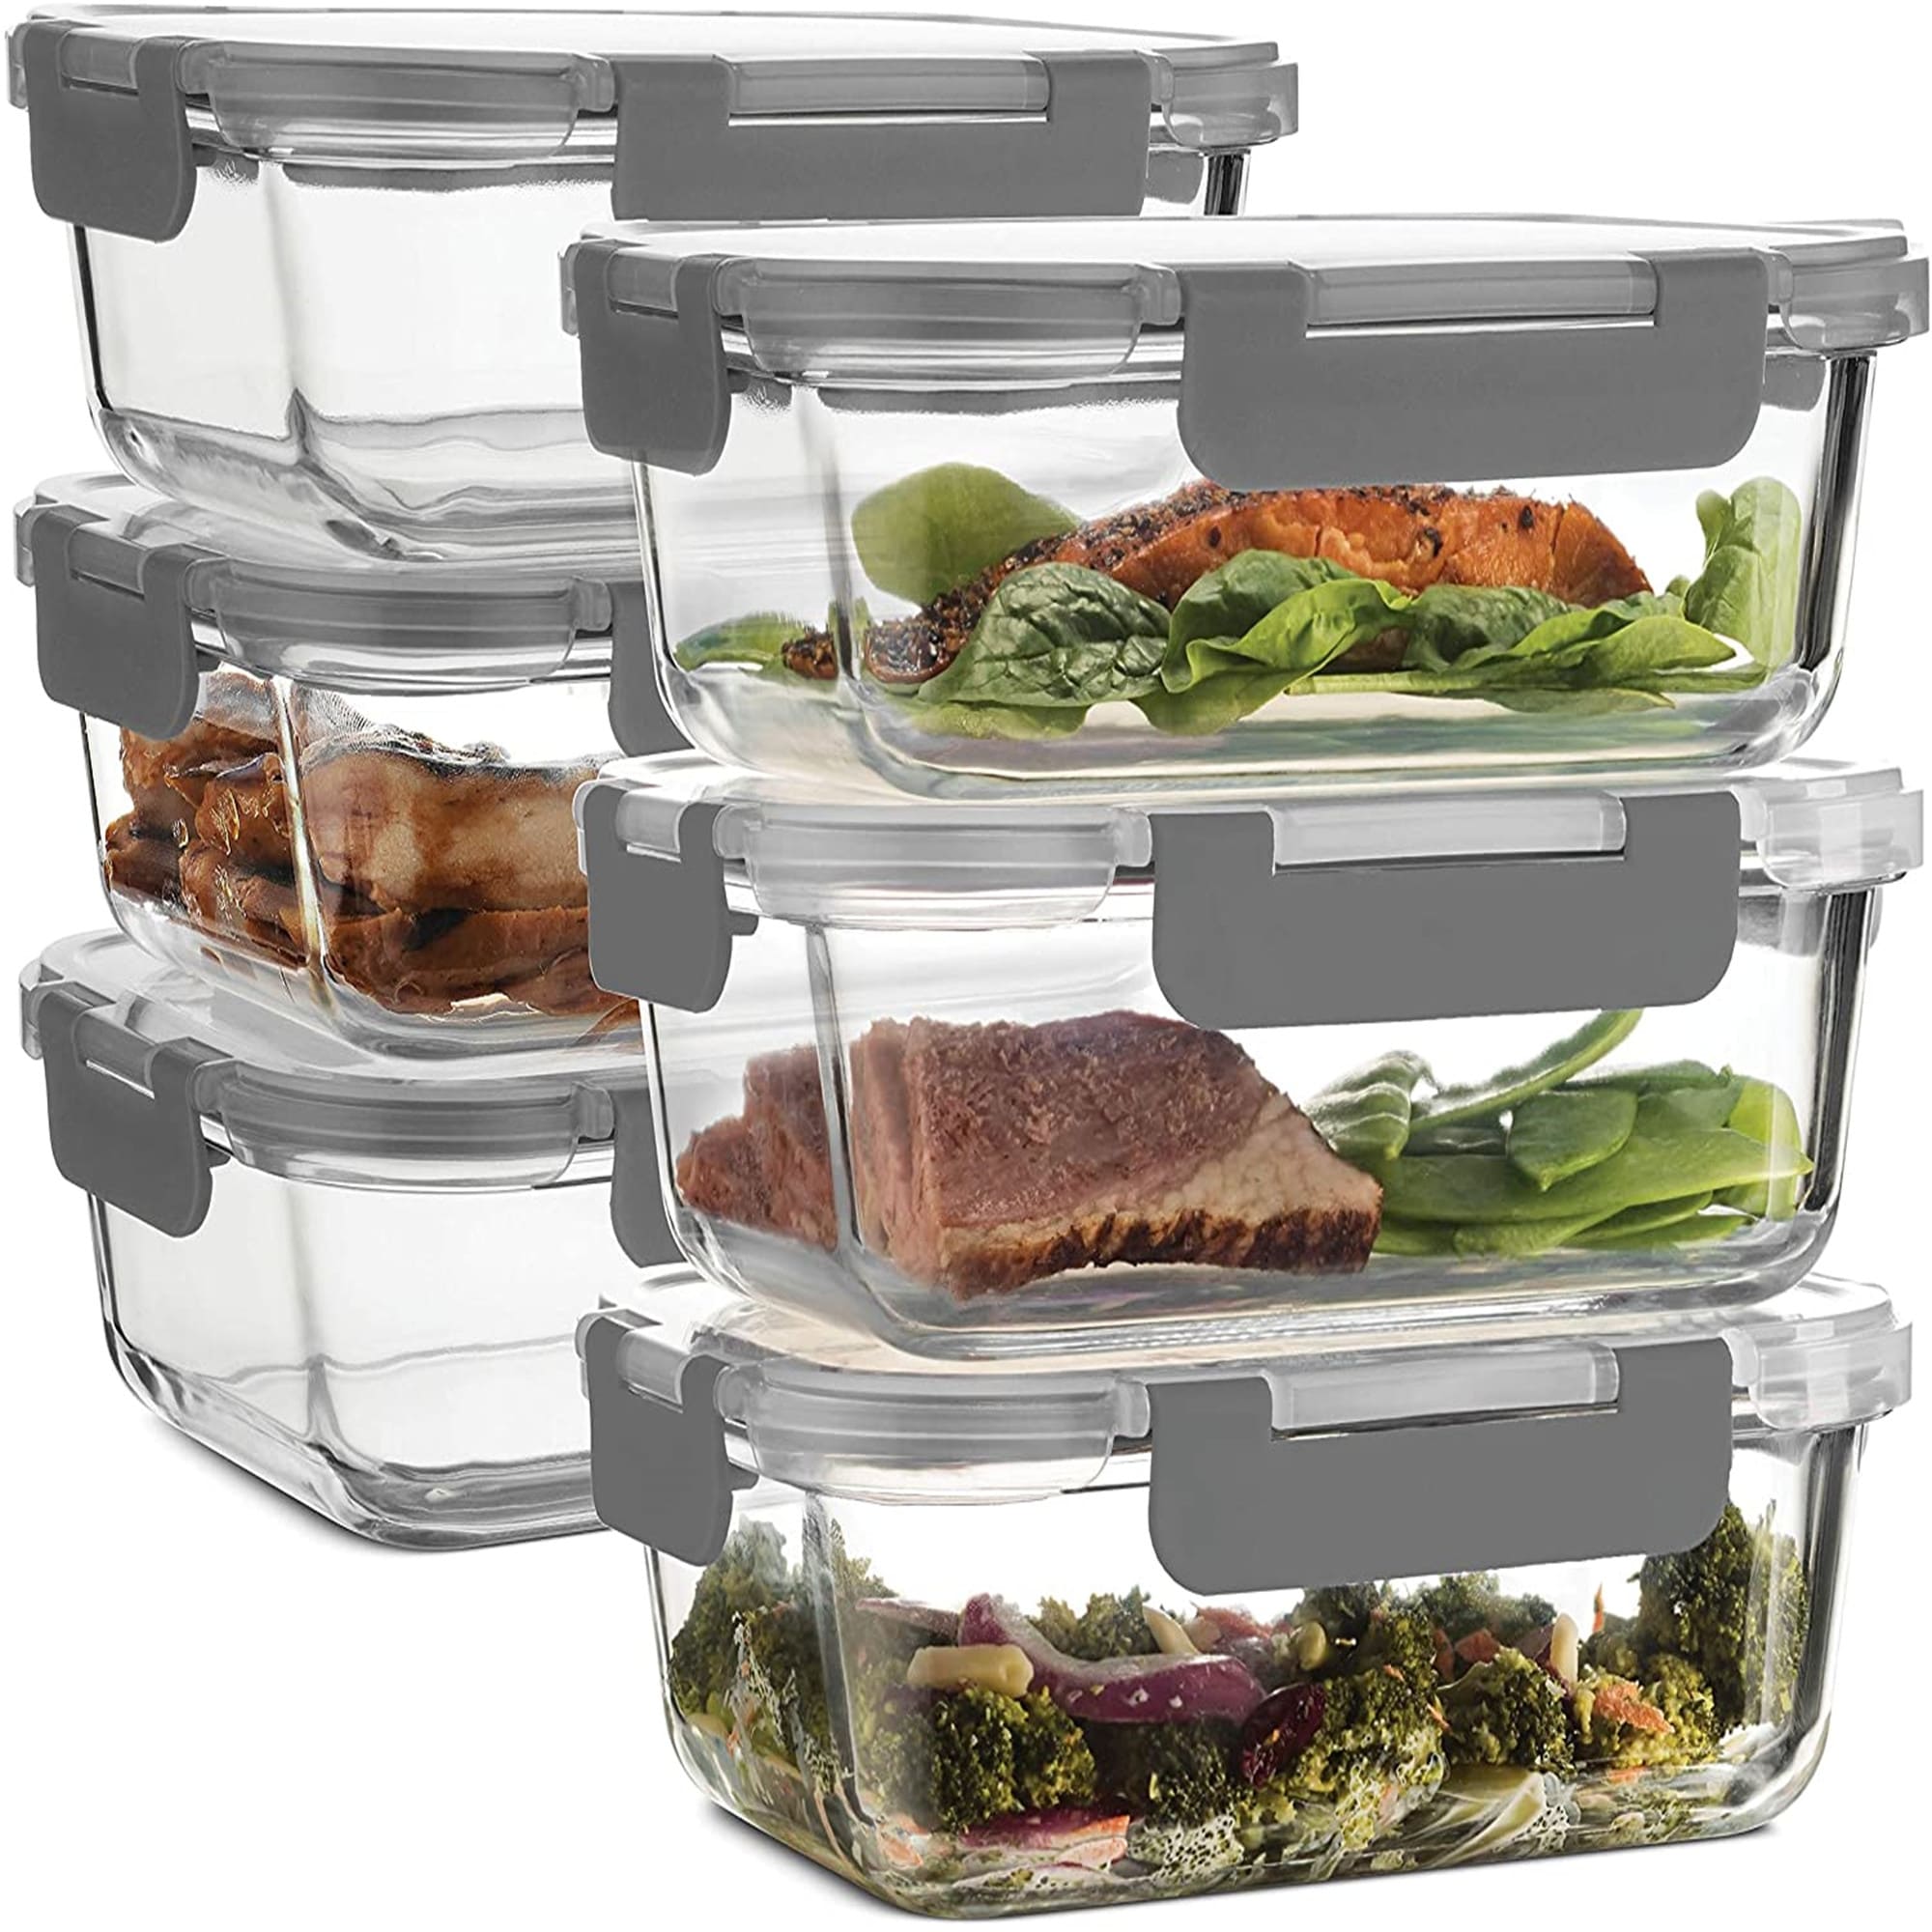 Top Benefits of storing food in an airtight container, by Superio Brand